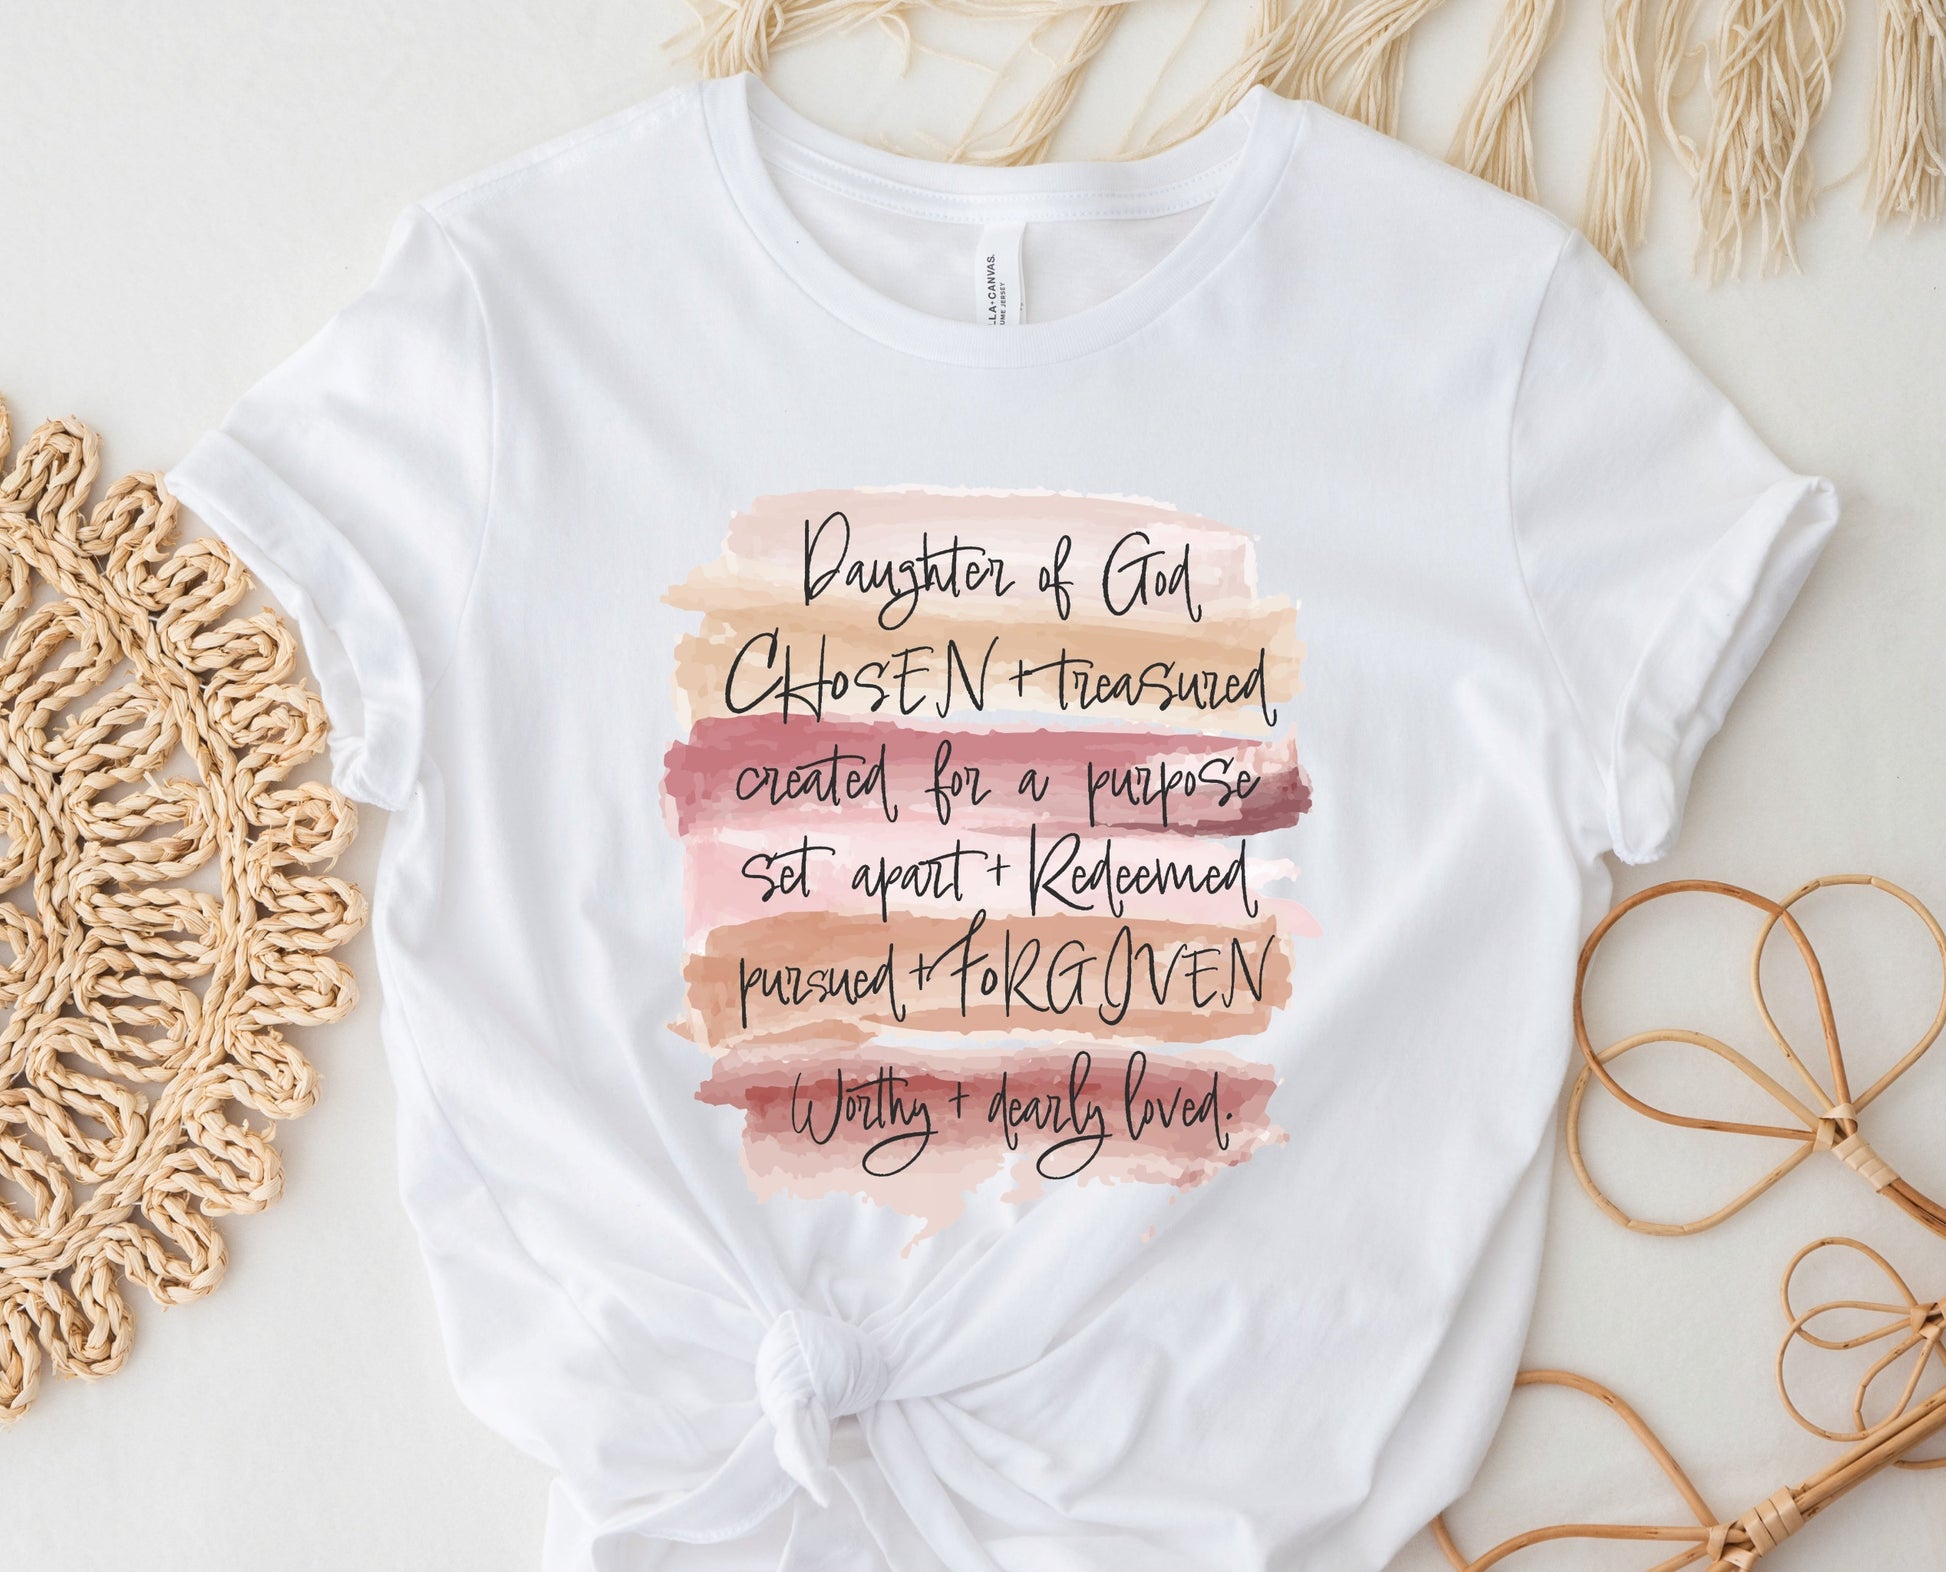 Daughter of God, Chosen, created for a purpose, redeemed, forgiven, worthy, loved, Christian woman aesthetic with watercolor splash background printed on soft white unisex t-shirt for women